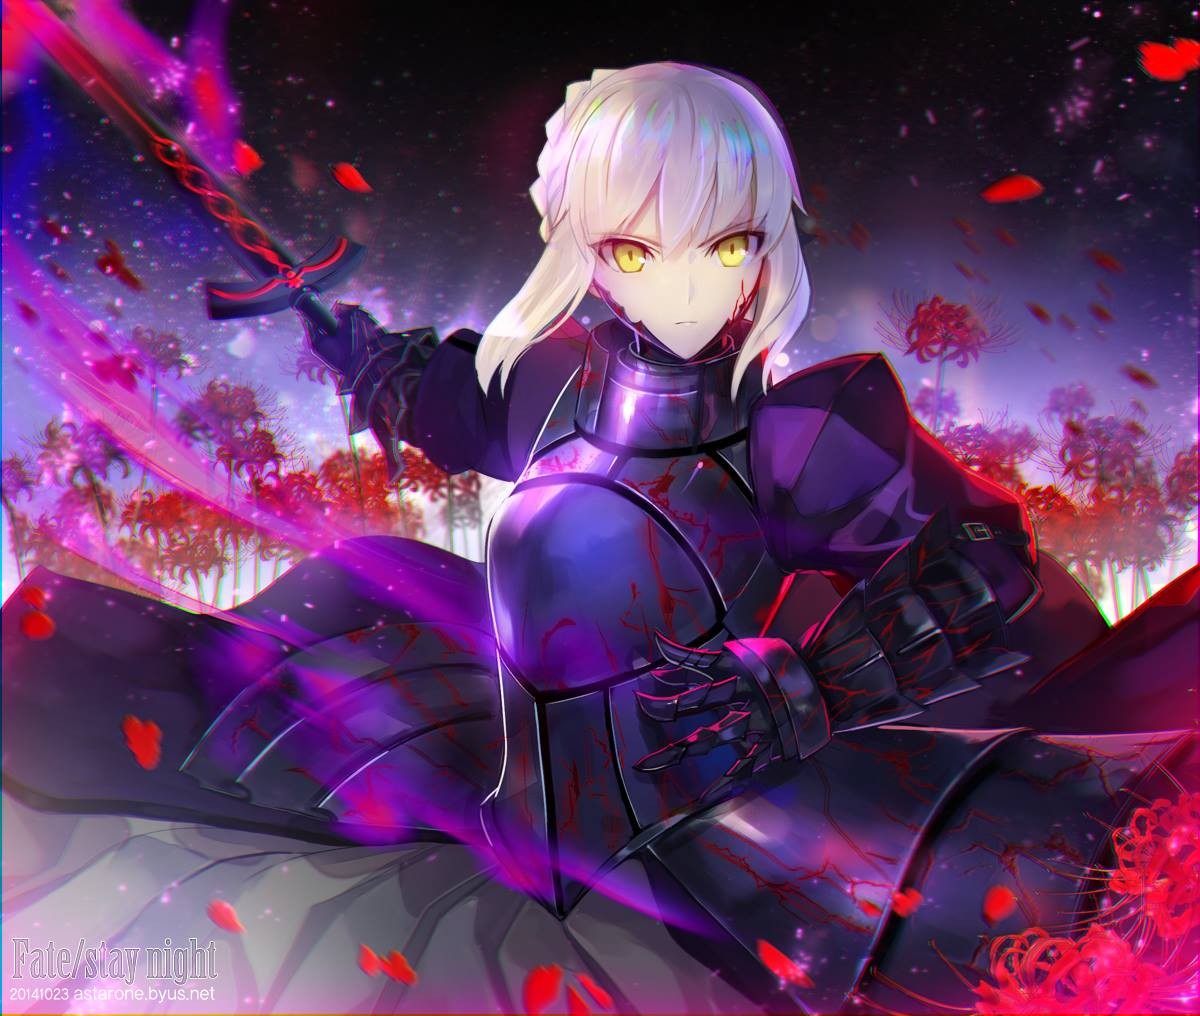 Anime 1200x1016 anime girls anime Saber Alter Fate series Artoria Pendragon Fate/Stay Night armor sword white hair yellow eyes Astarone looking at viewer fantasy armor women with swords